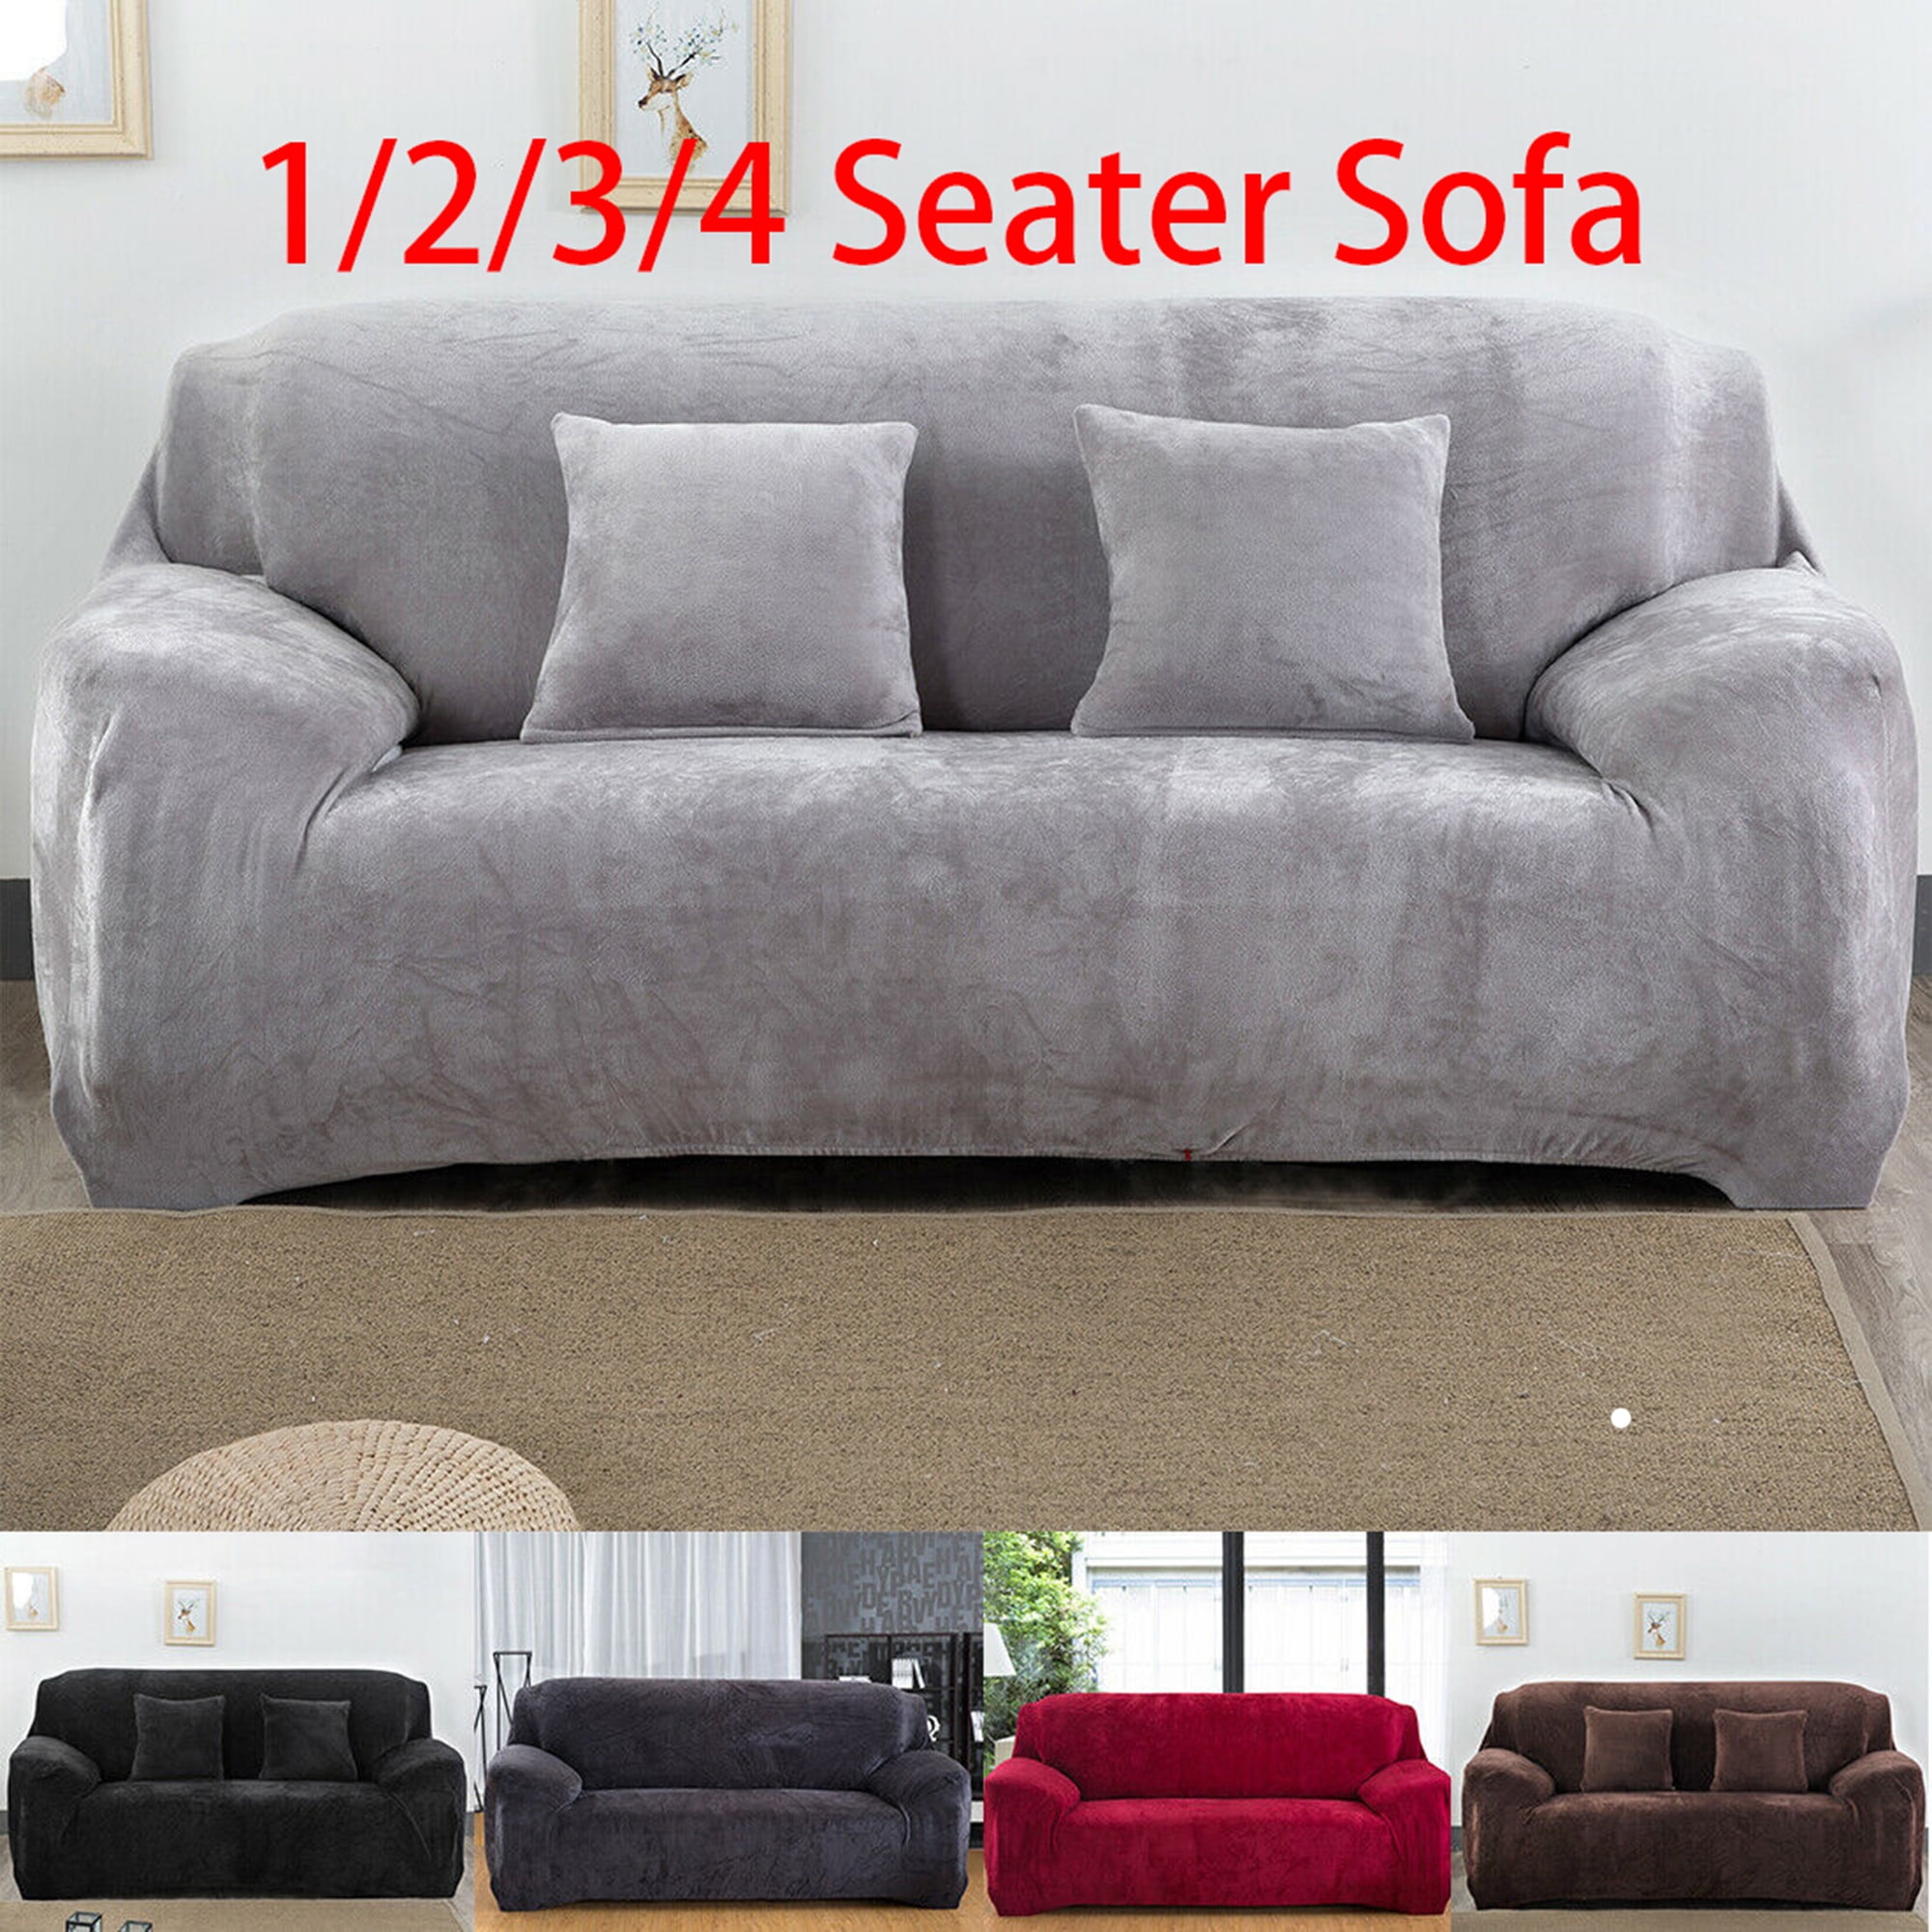 1-4 Seater Sofa Stretch Cover Couch Fabric Slipcover Furniture Elastic Protector 